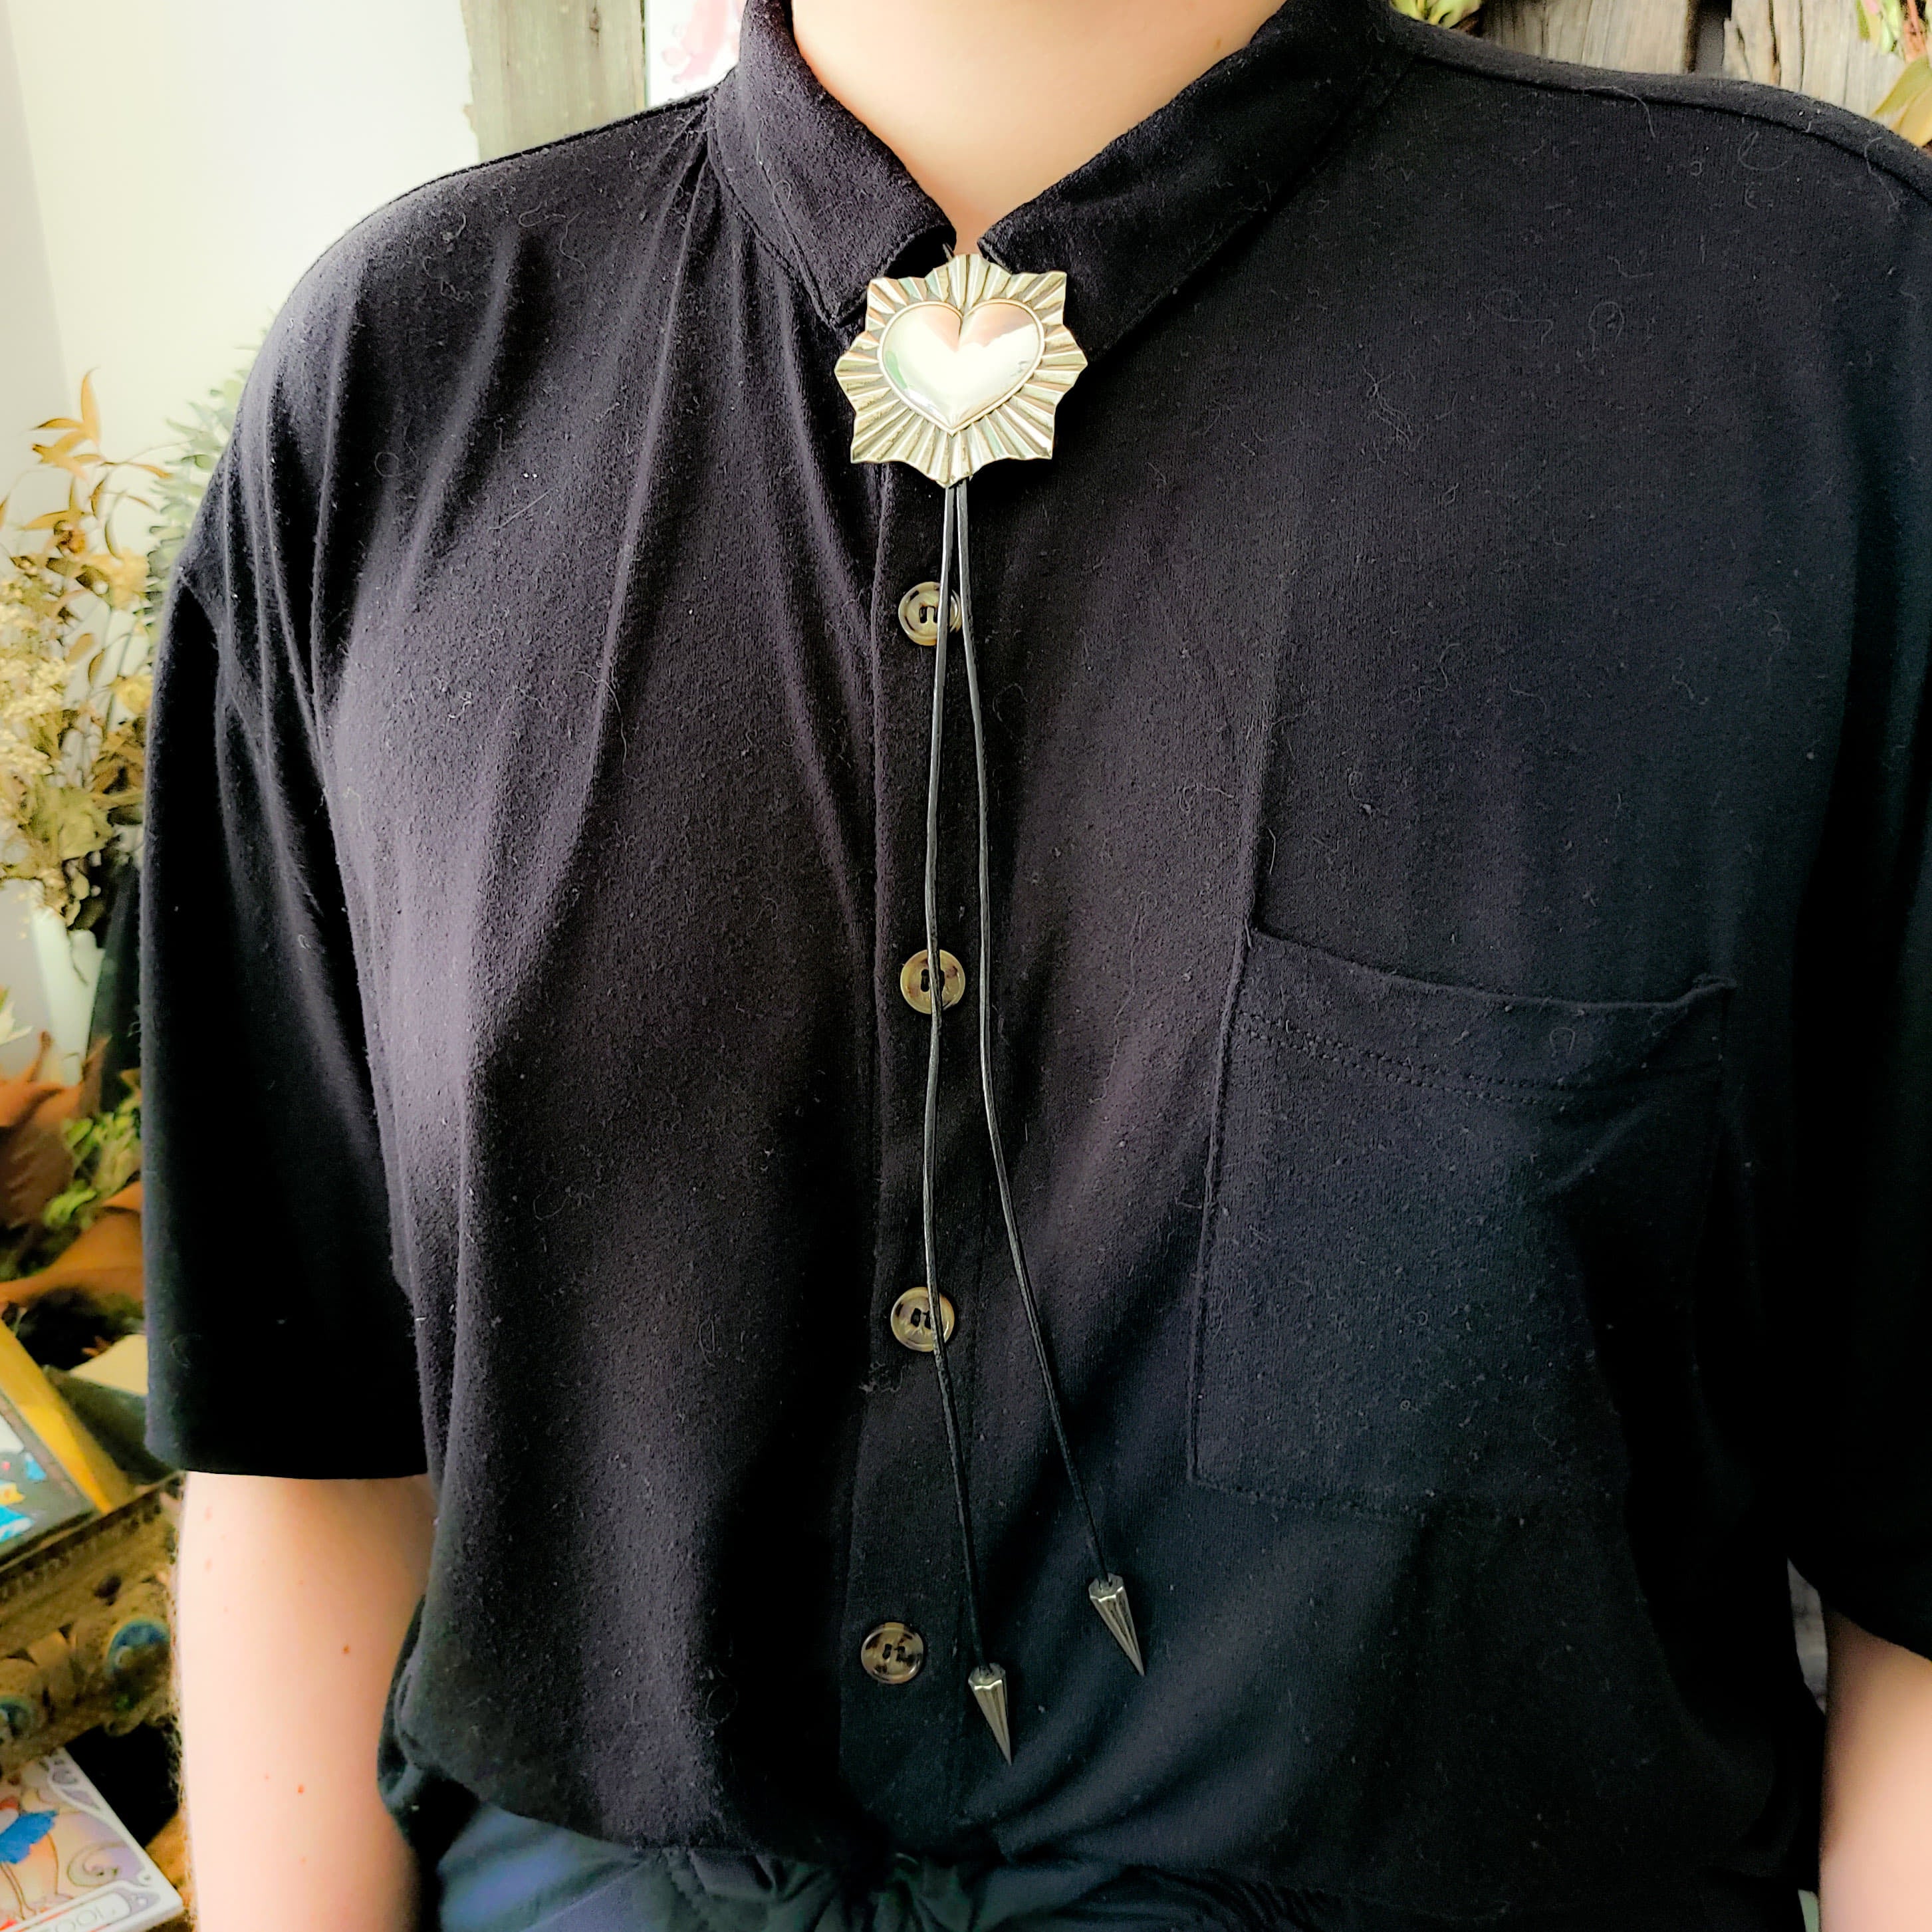 Vintage Bolo Bolo Bow Tie Set for Men and Women - Cowboy and Cowgirl Accessories with Necklace Chain